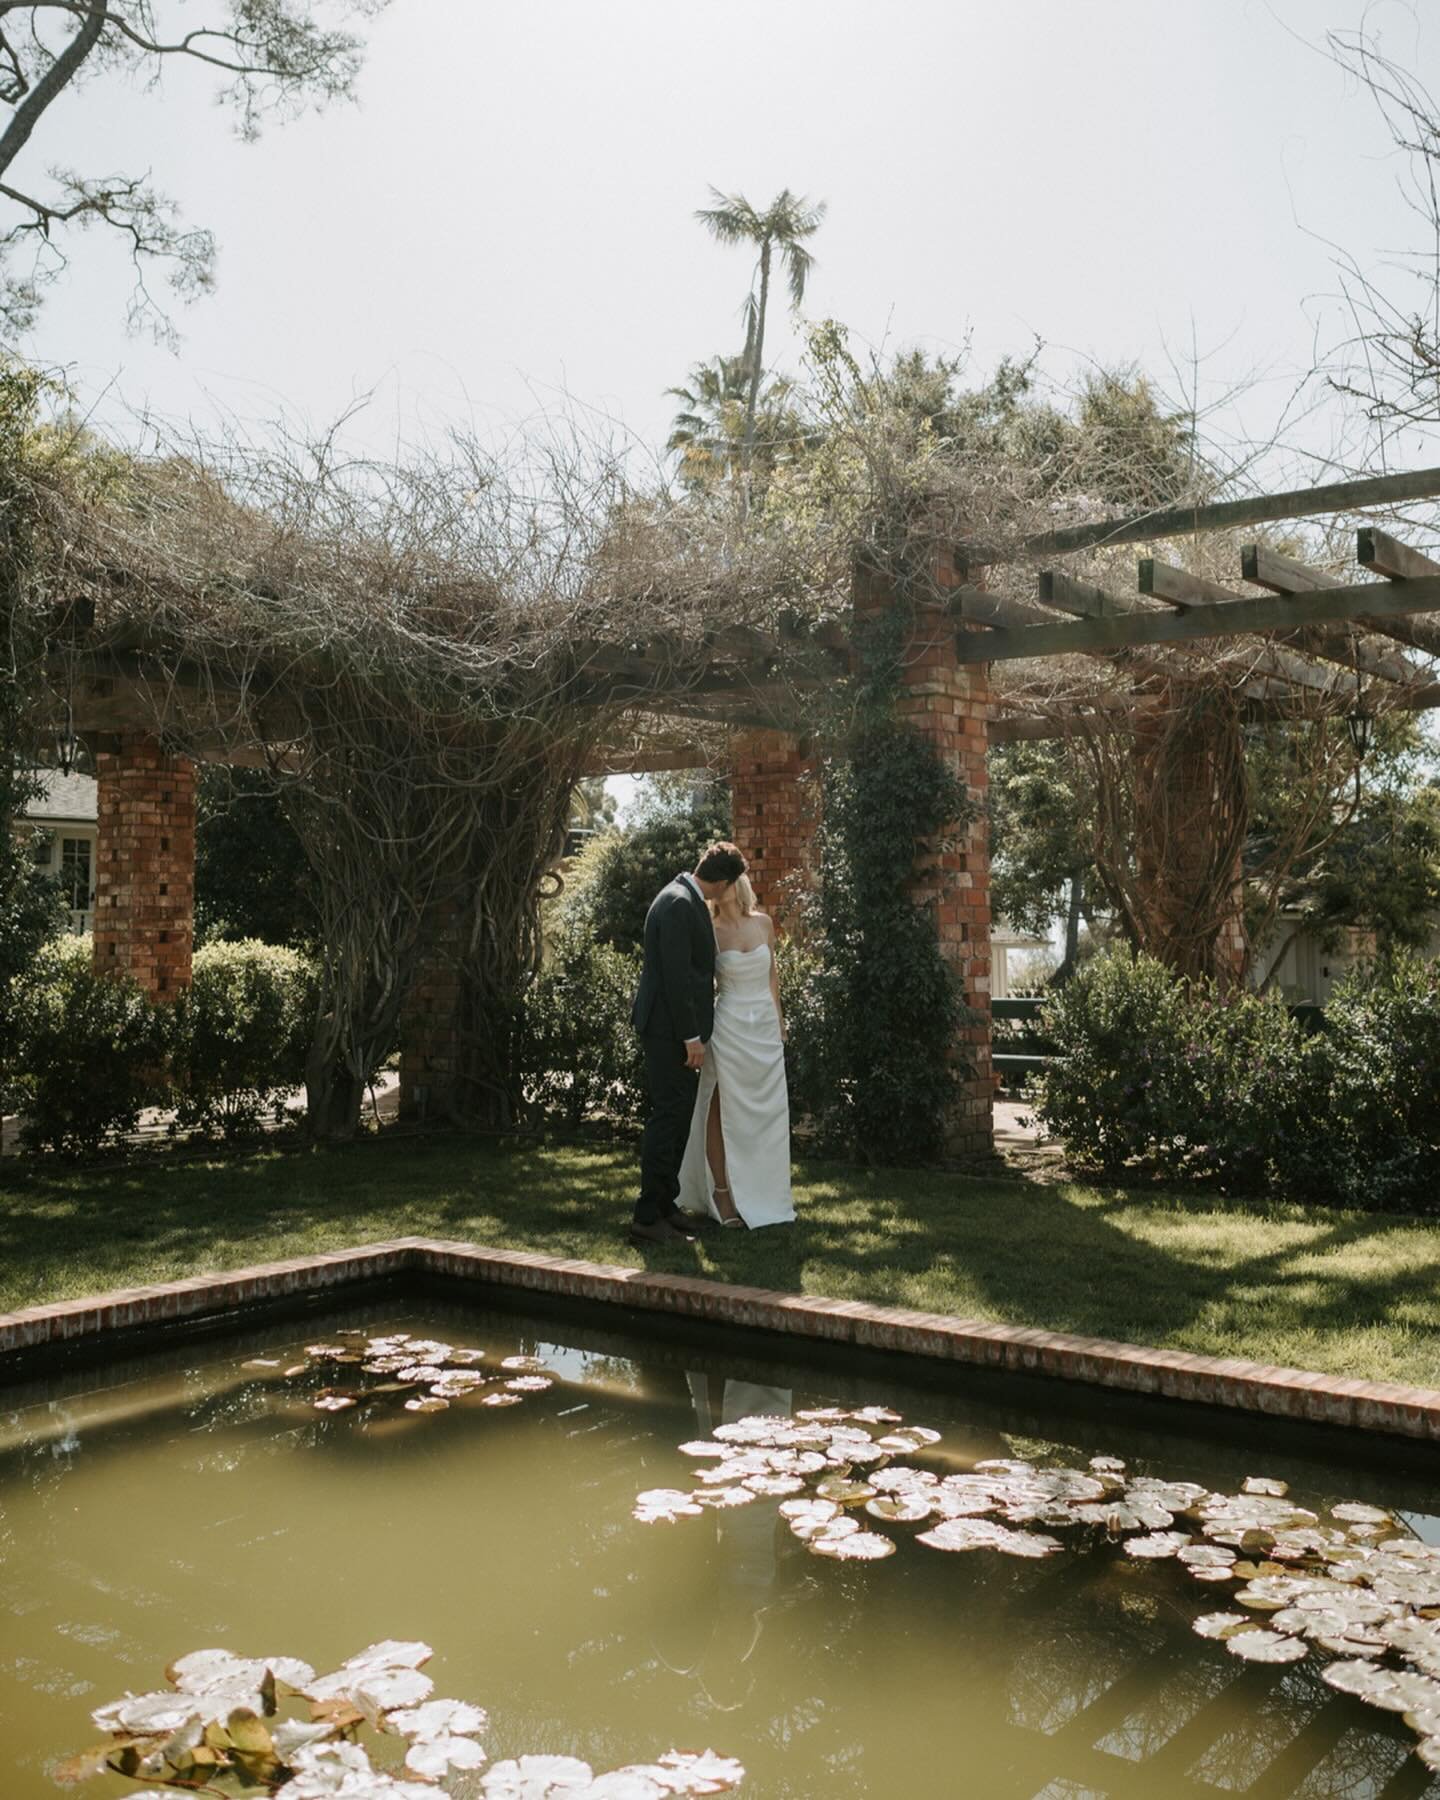 A Santa Barbara elopement in chronological order today (for my OCD)